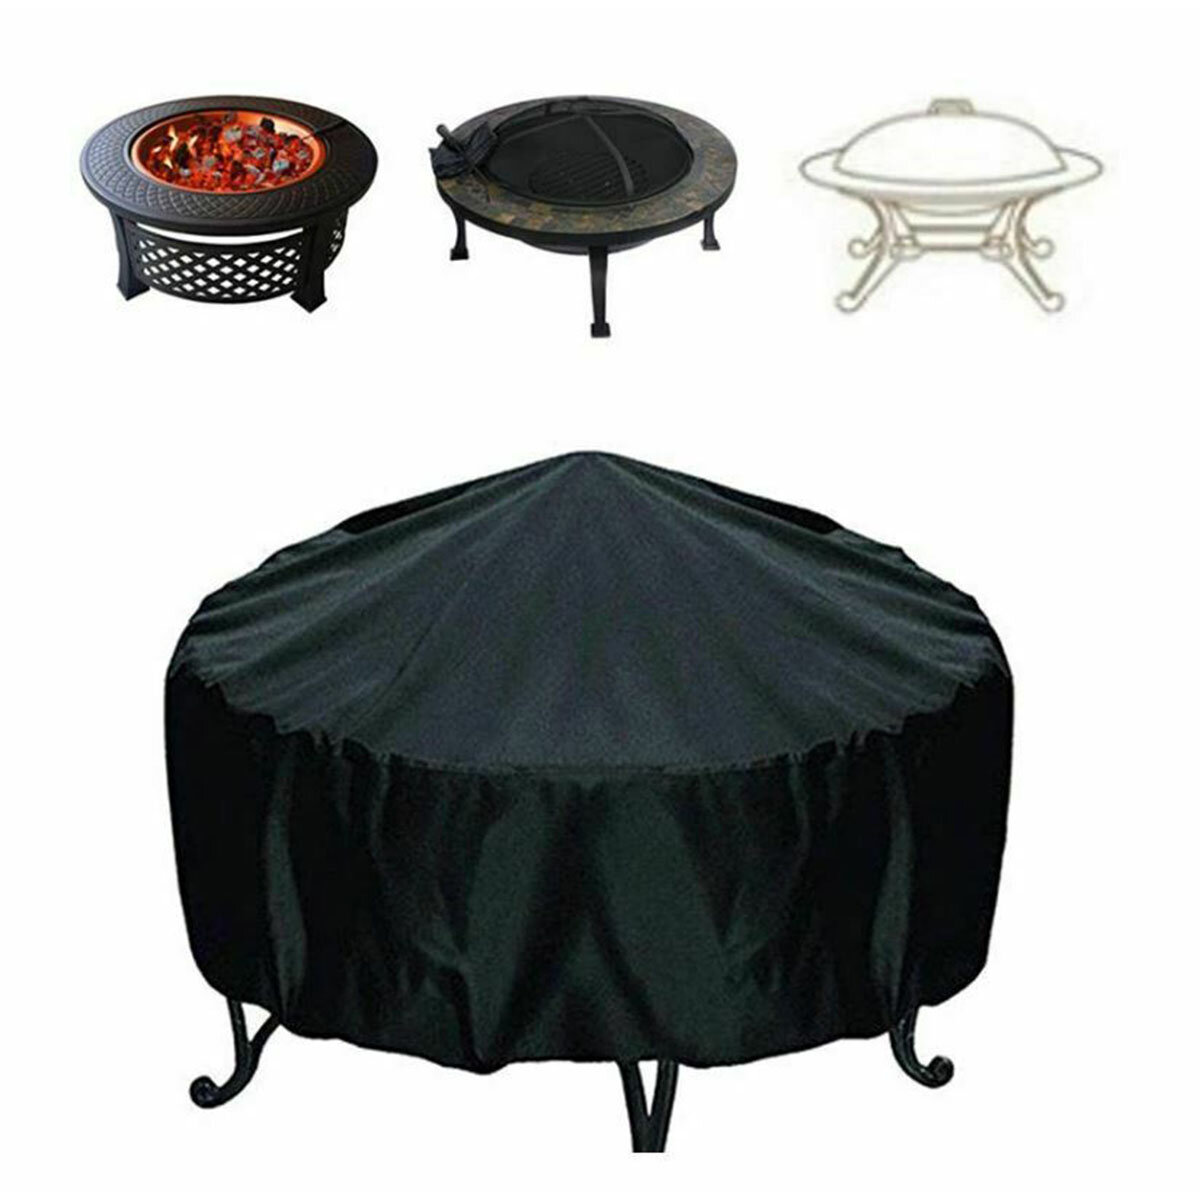 Outdoor Garden BBQ Grill Cover Rainproof Dustproof UV Resistant Round Grill Cover Round Table Protec